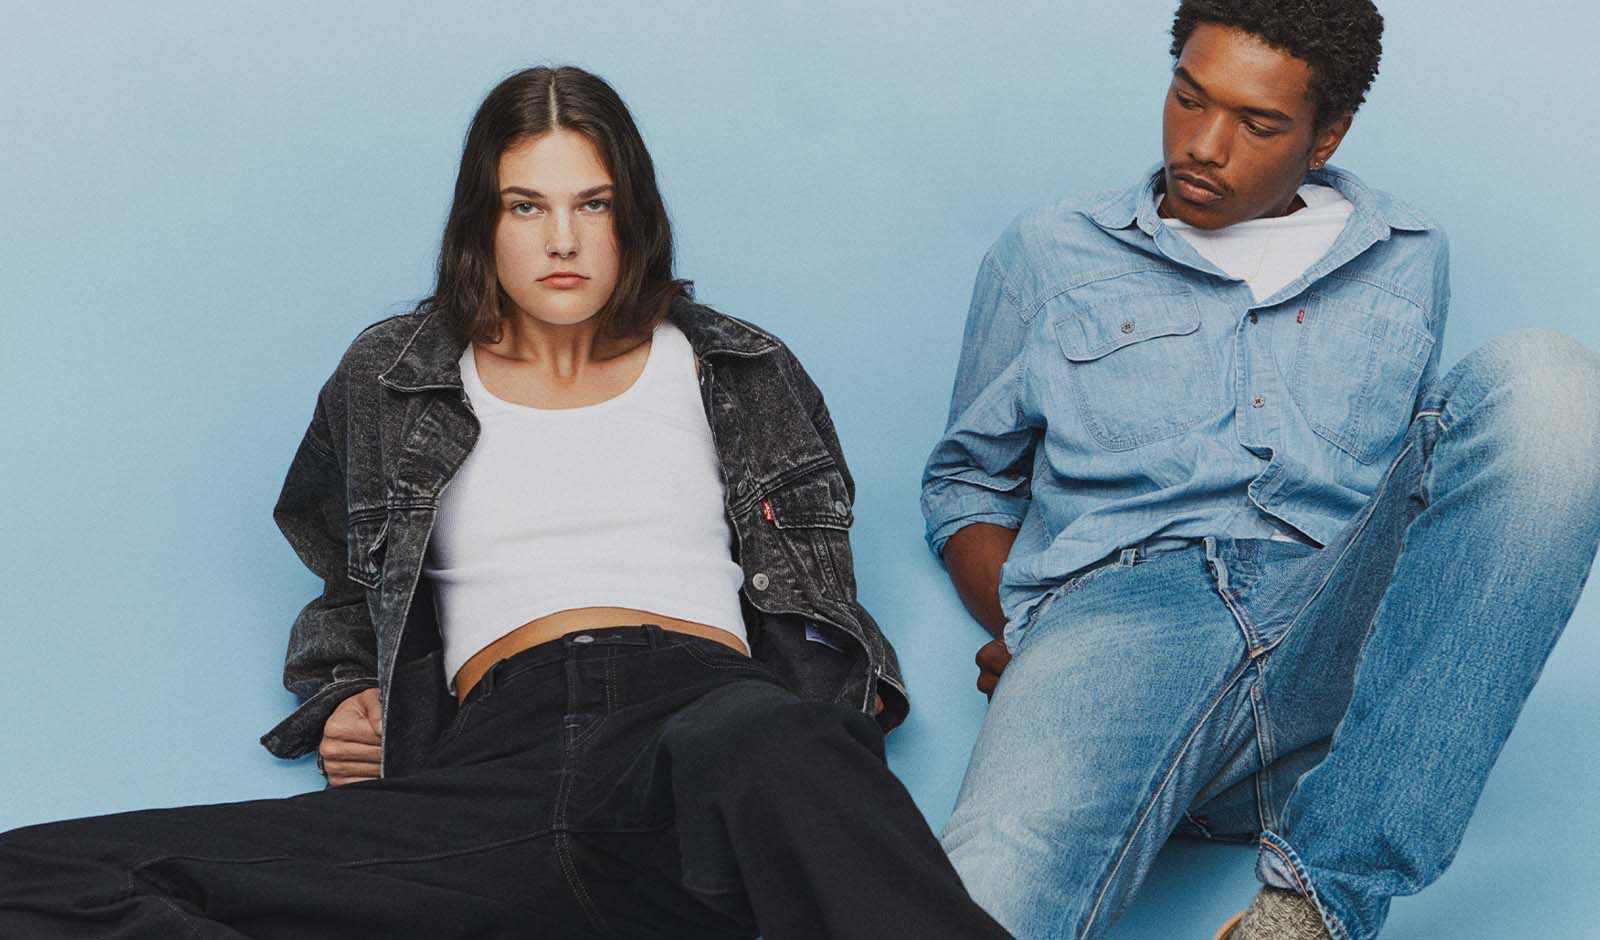 Save 20% on full-price items at Levi's!